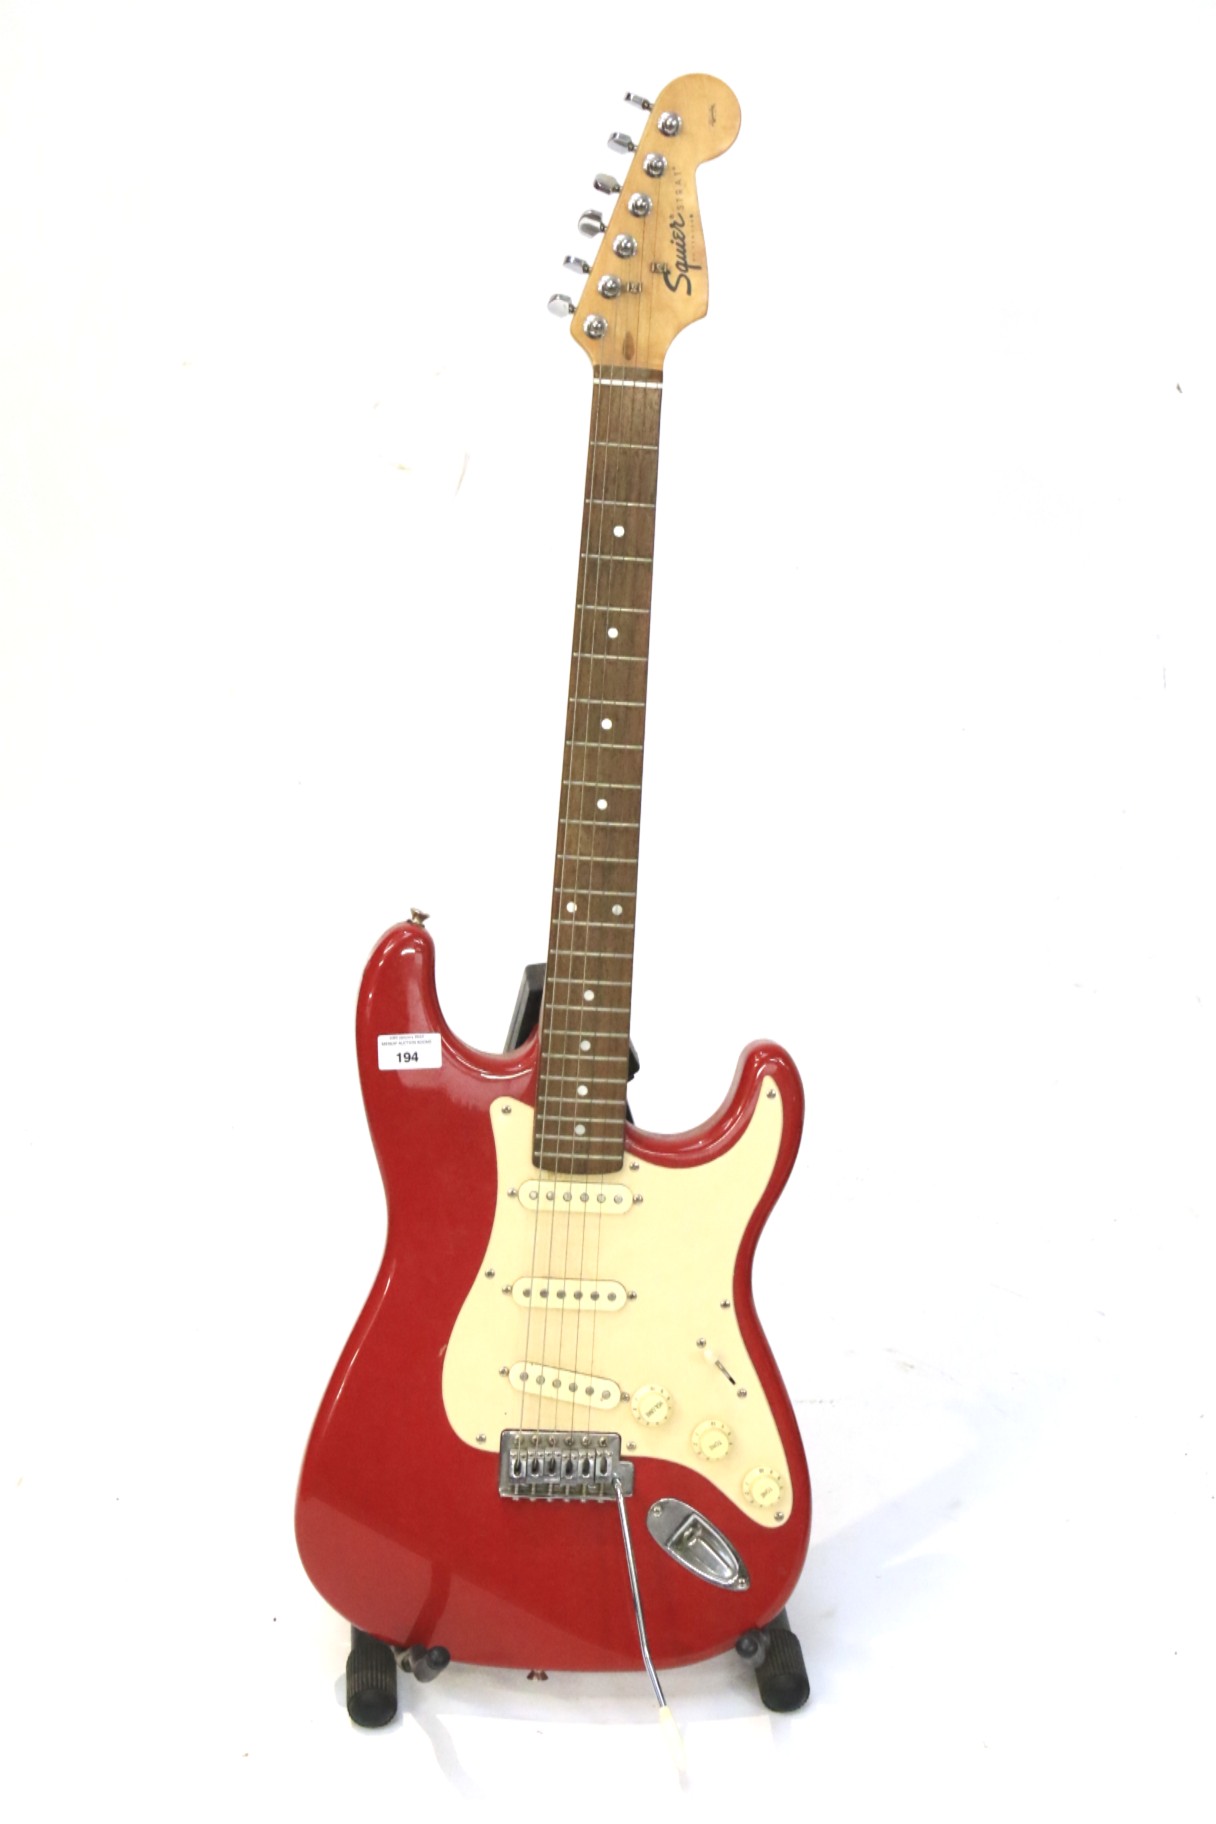 A Squier strat electric guitar by Fender.